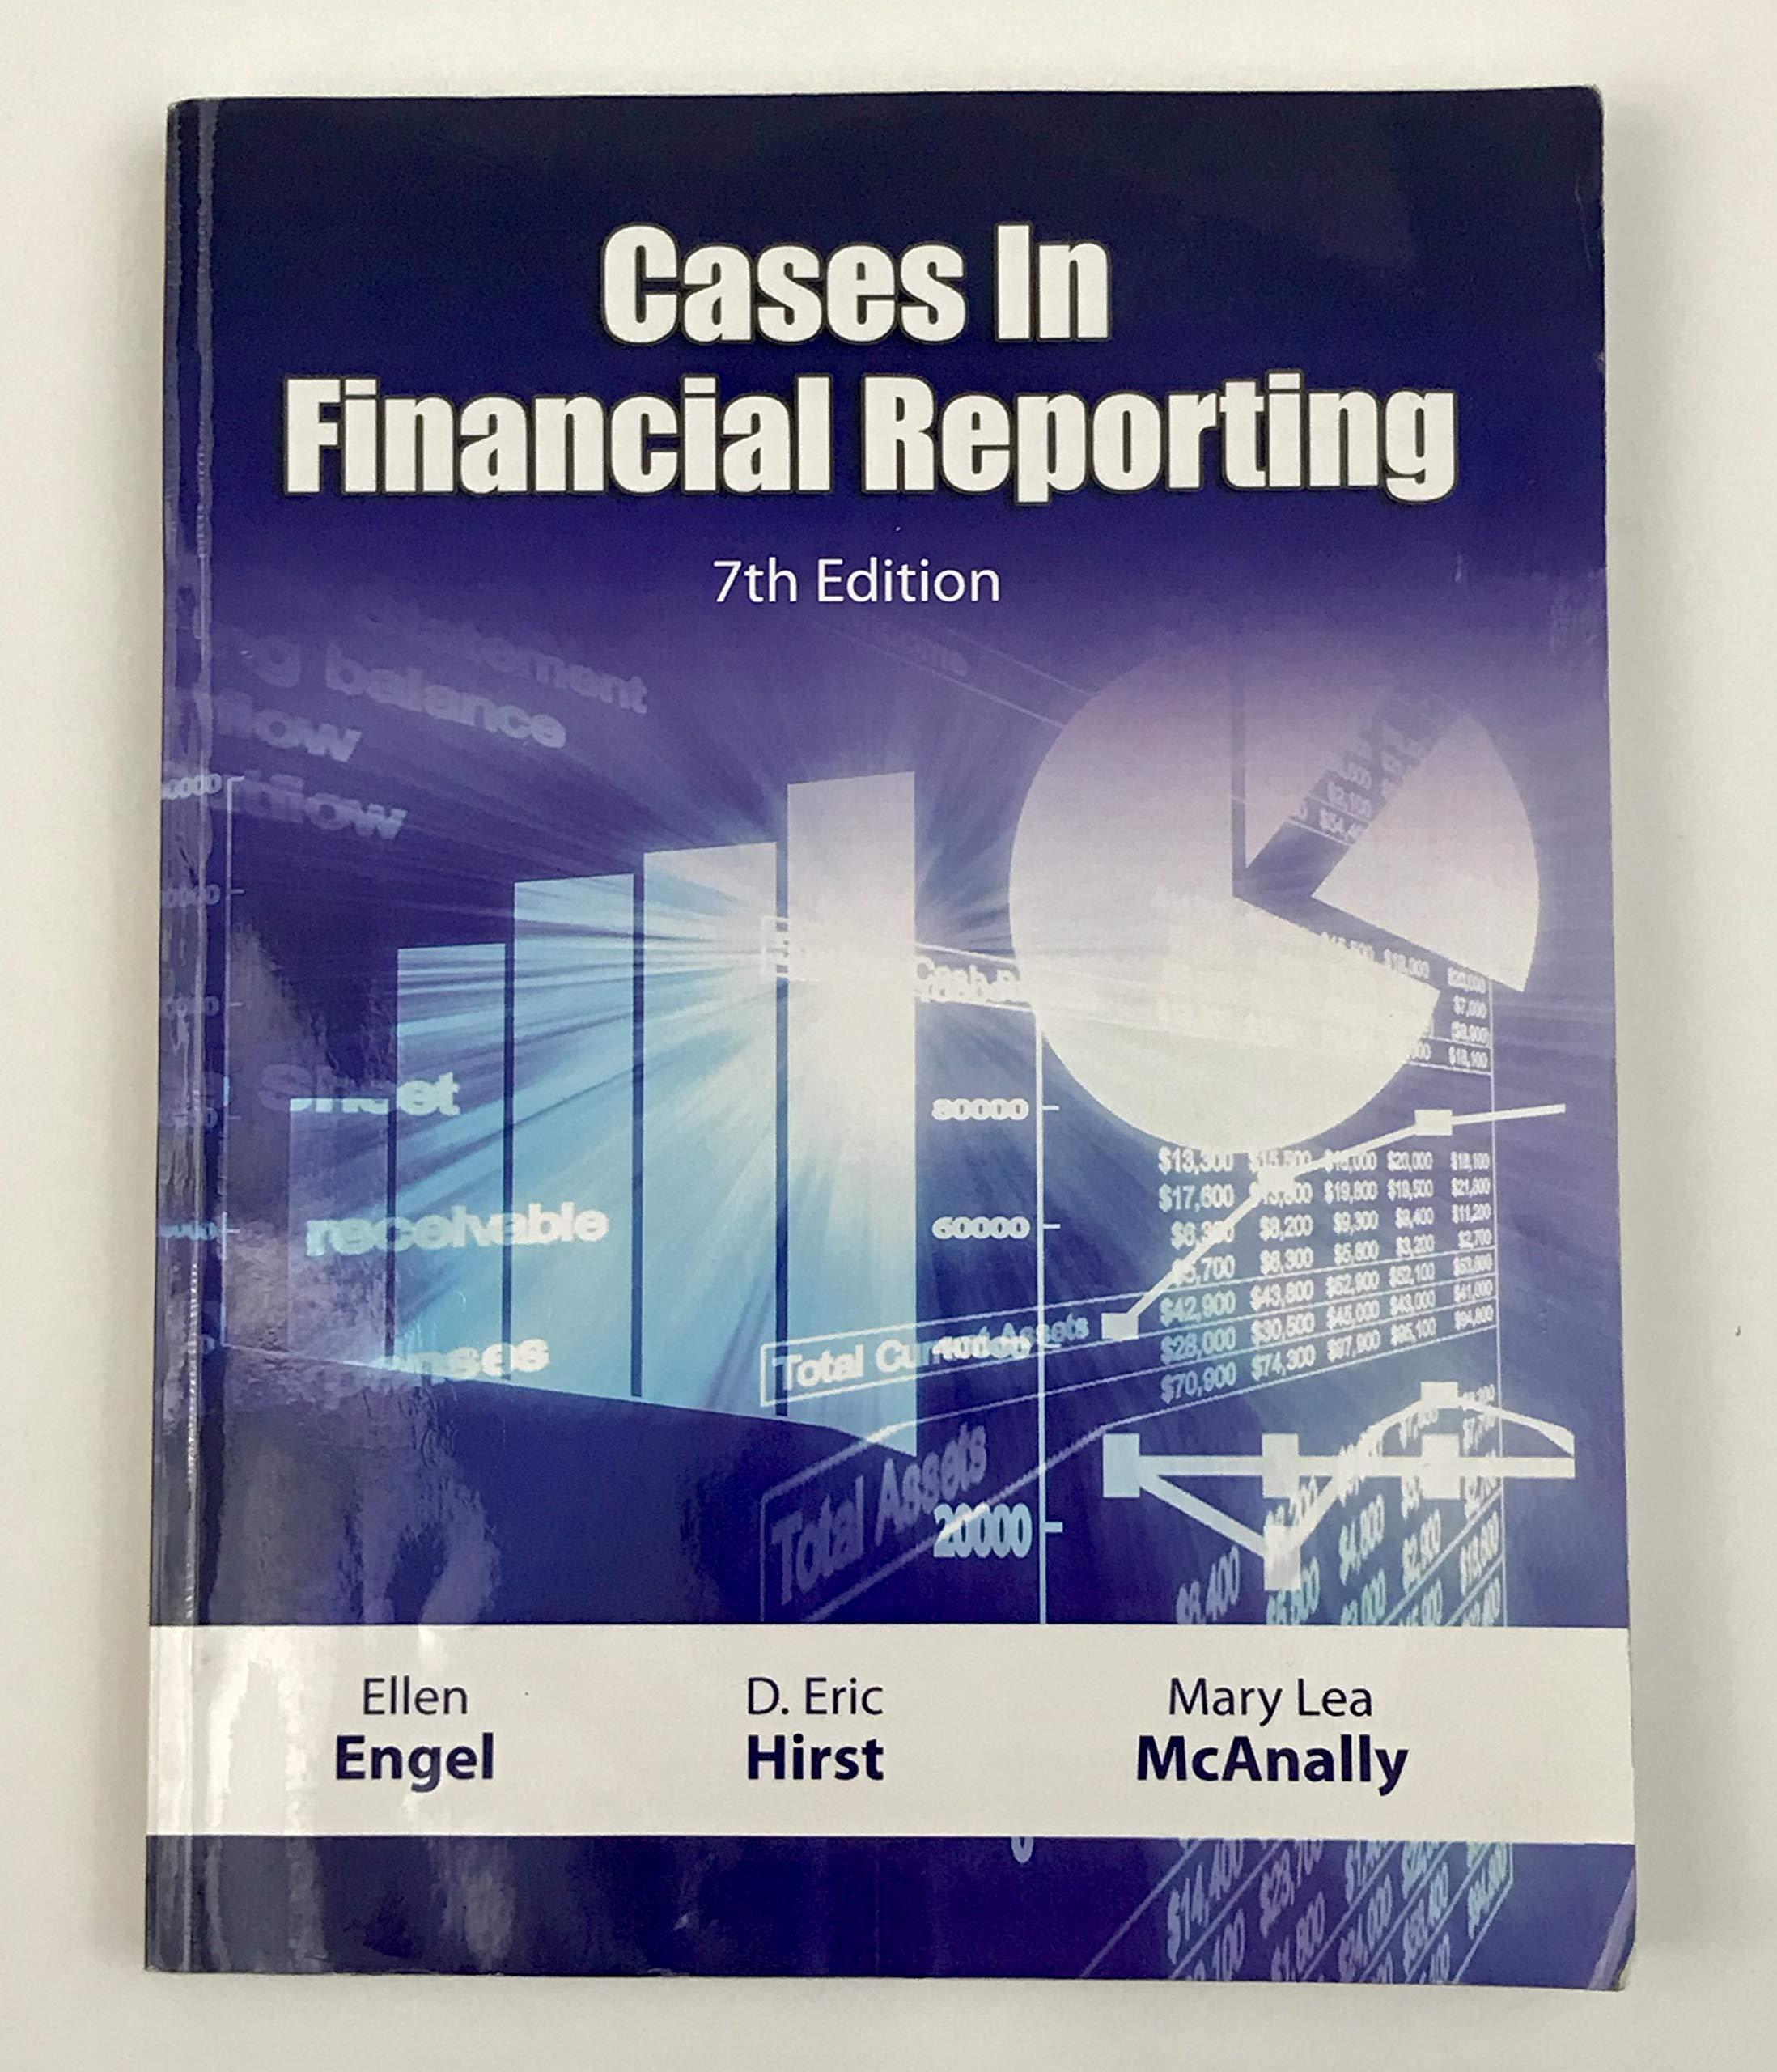 cases in financial reporting 7th edition ellen engel, d. eric hirst, mary lea mcanally 1934319791,